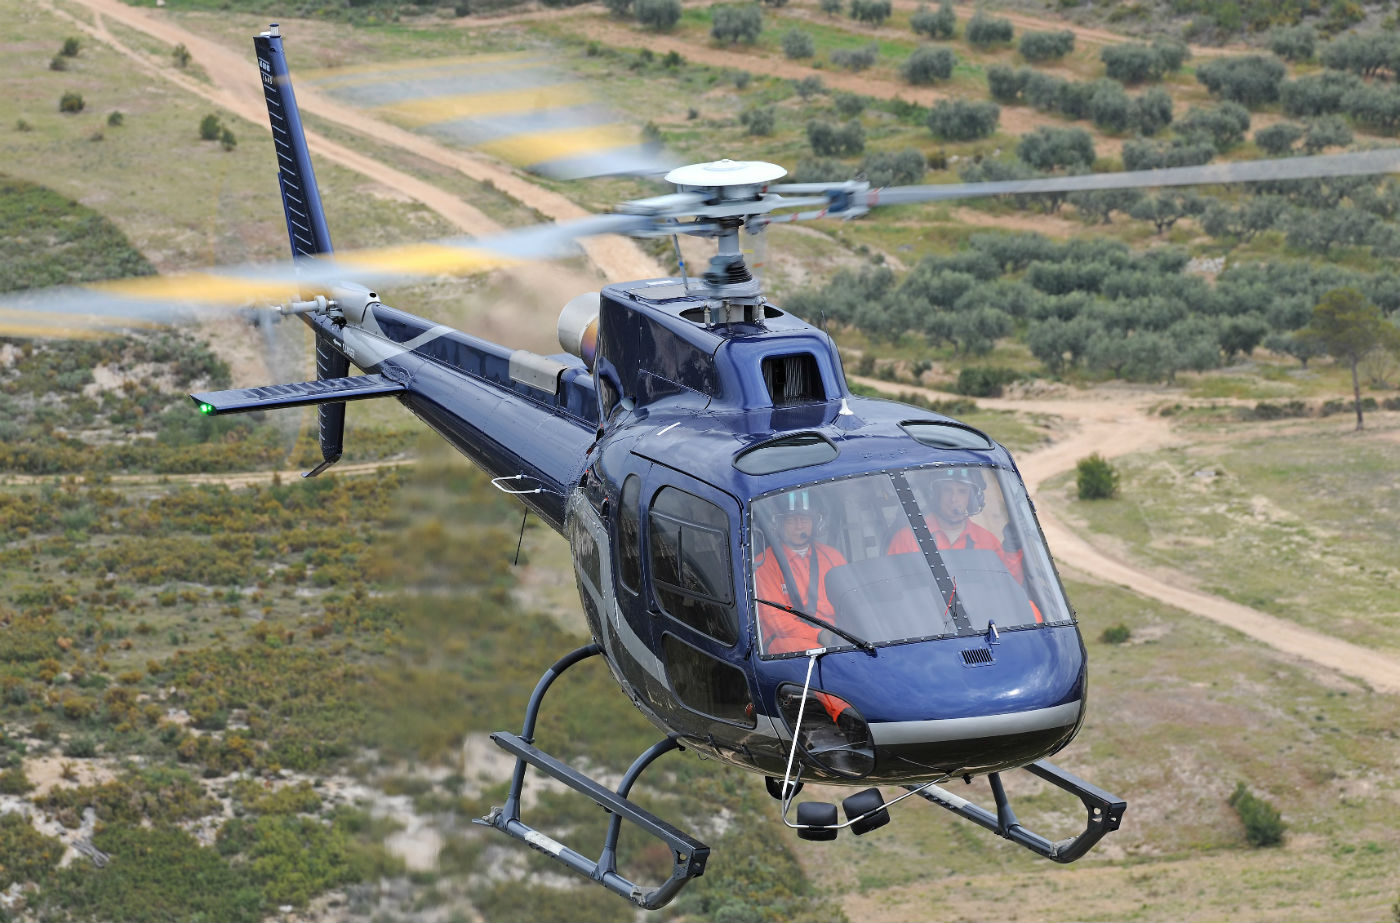 This will be the first H125 to be operated by the Japanese company, and it will replace the two SA315s, which have been operating since 1985. Airbus Photo